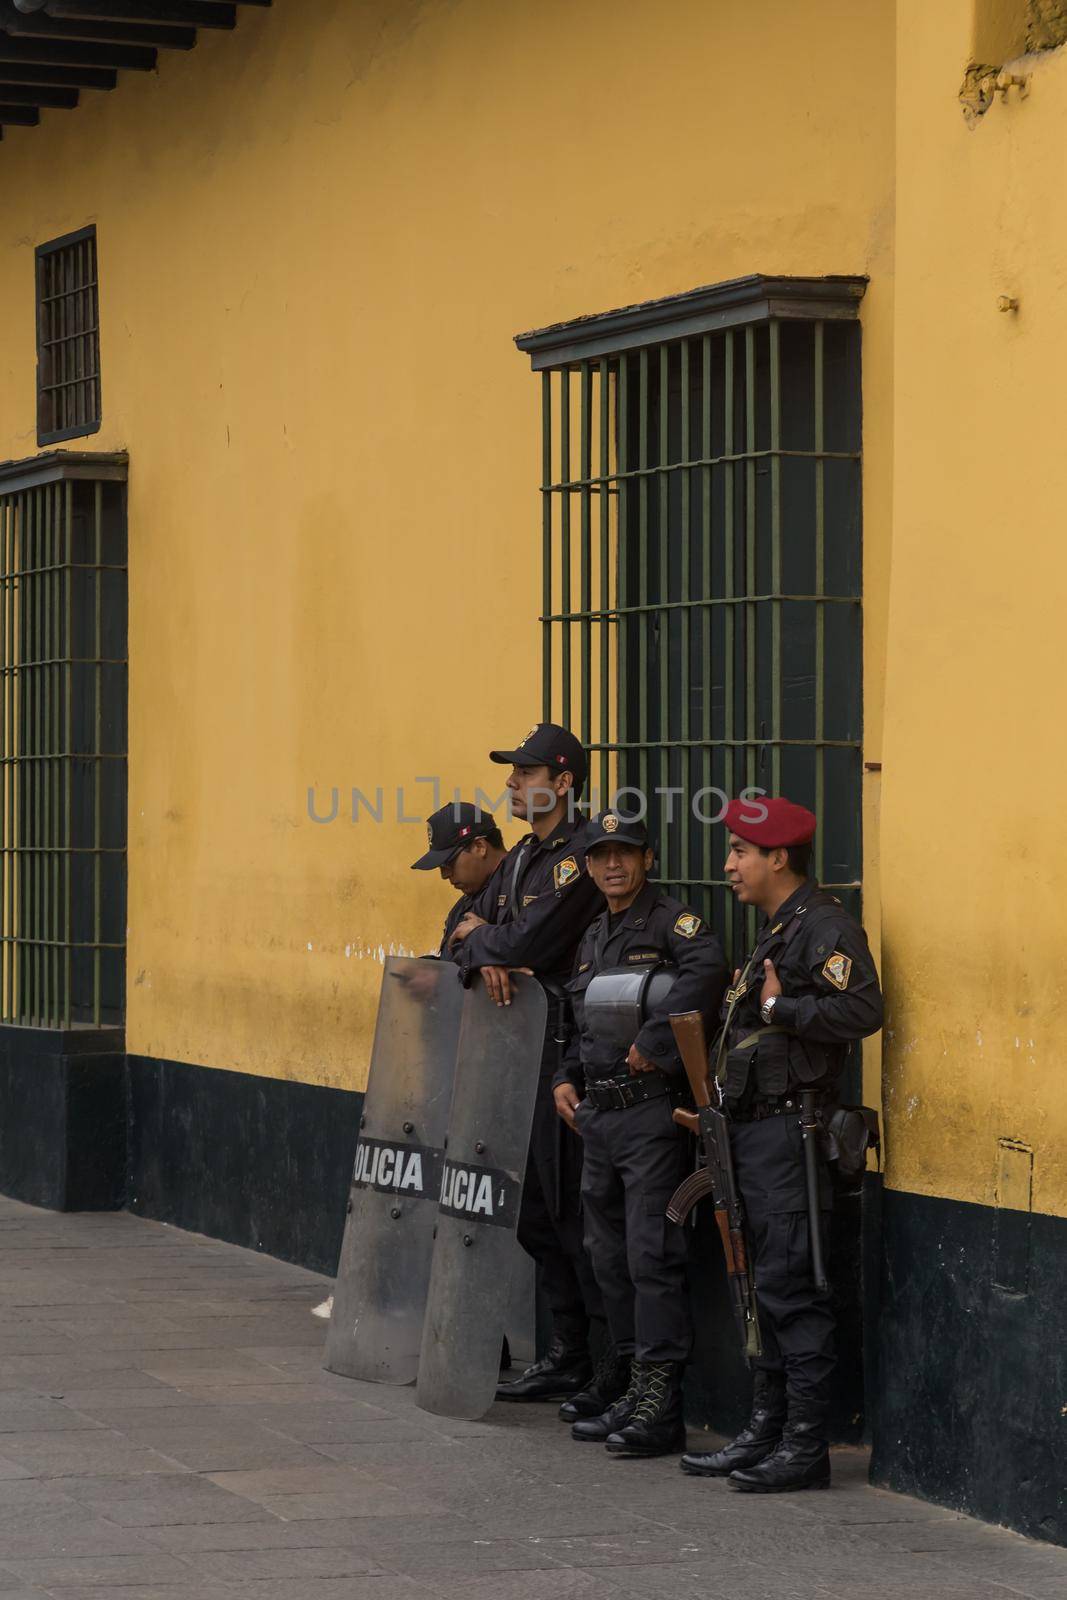 Lima, Peru - September 02, 2015: Four policemen guarding a side road to the central square in front of the government palace on a Wednesday afternoon.